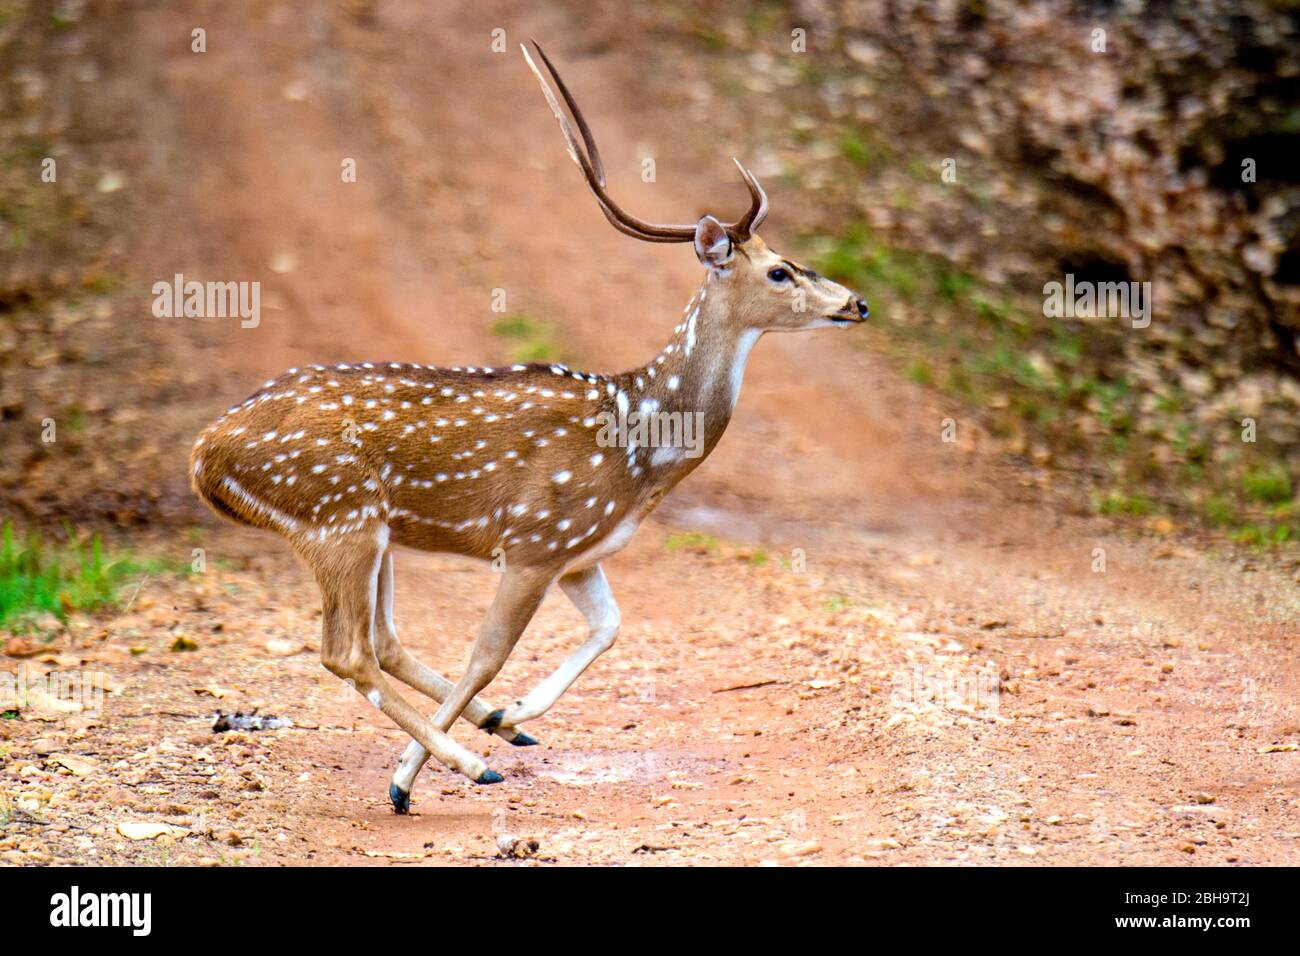 View of running Spotted deer (Rusa alfredi), India Stock Photo